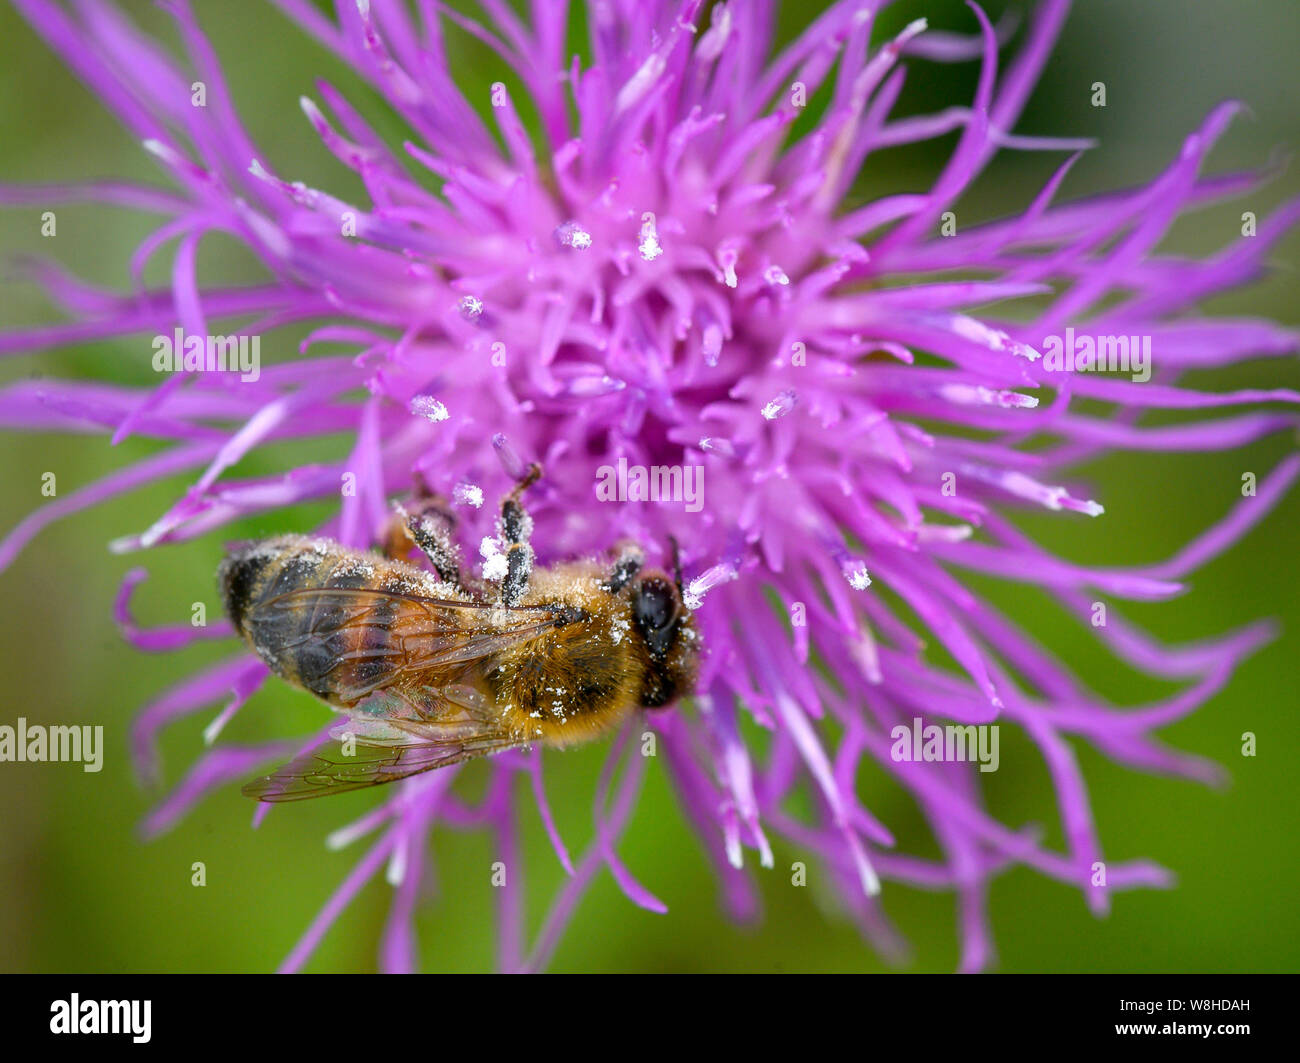 Elkton, OREGON, USA. 9th Aug, 2019. A honey bee forages on a wildflower growing in a pasture near Elkton in rural western Oregon. In July the EPA undid regulations on the use of an insecticide called sulfoxaflor which is highly toxic to bees. The EPA will allow the use of the the bug killer on about 200 million acres of U.S. crops. 'The Trump EPA's reckless approval of this bee-killing pesticide across 200 million US acres of crops like strawberries and watermelon without any public process is a terrible blow to imperiled pollinators,'' Lori Ann Burd, director of the Center for Biologic Stock Photo